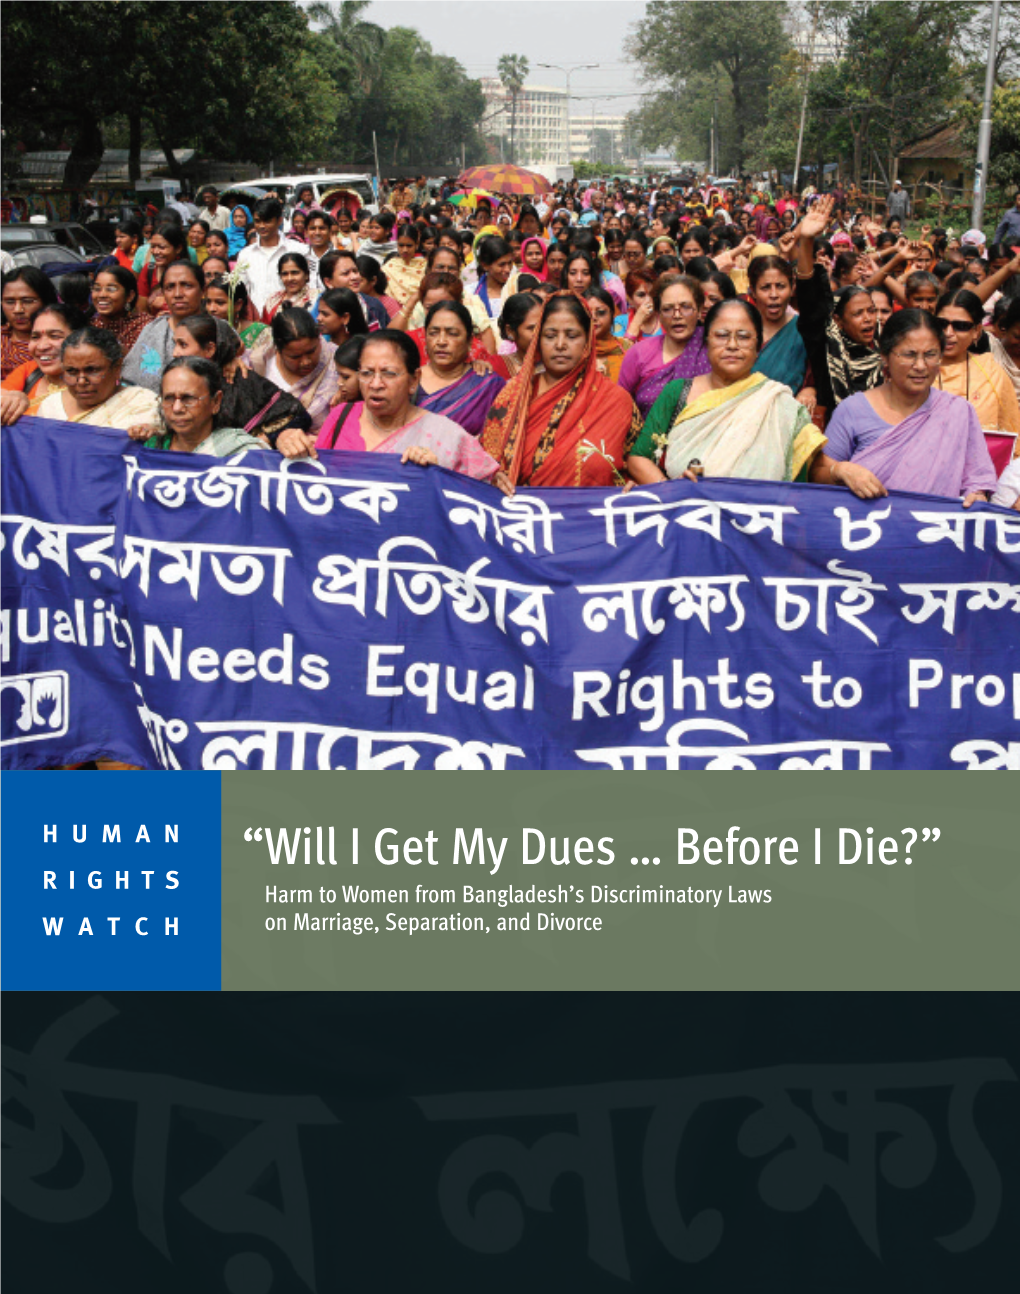 “Will I Get My Dues … Before I Die?” RIGHTS Harm to Women from Bangladesh’S Discriminatory Laws WATCH on Marriage, Separation, and Divorce